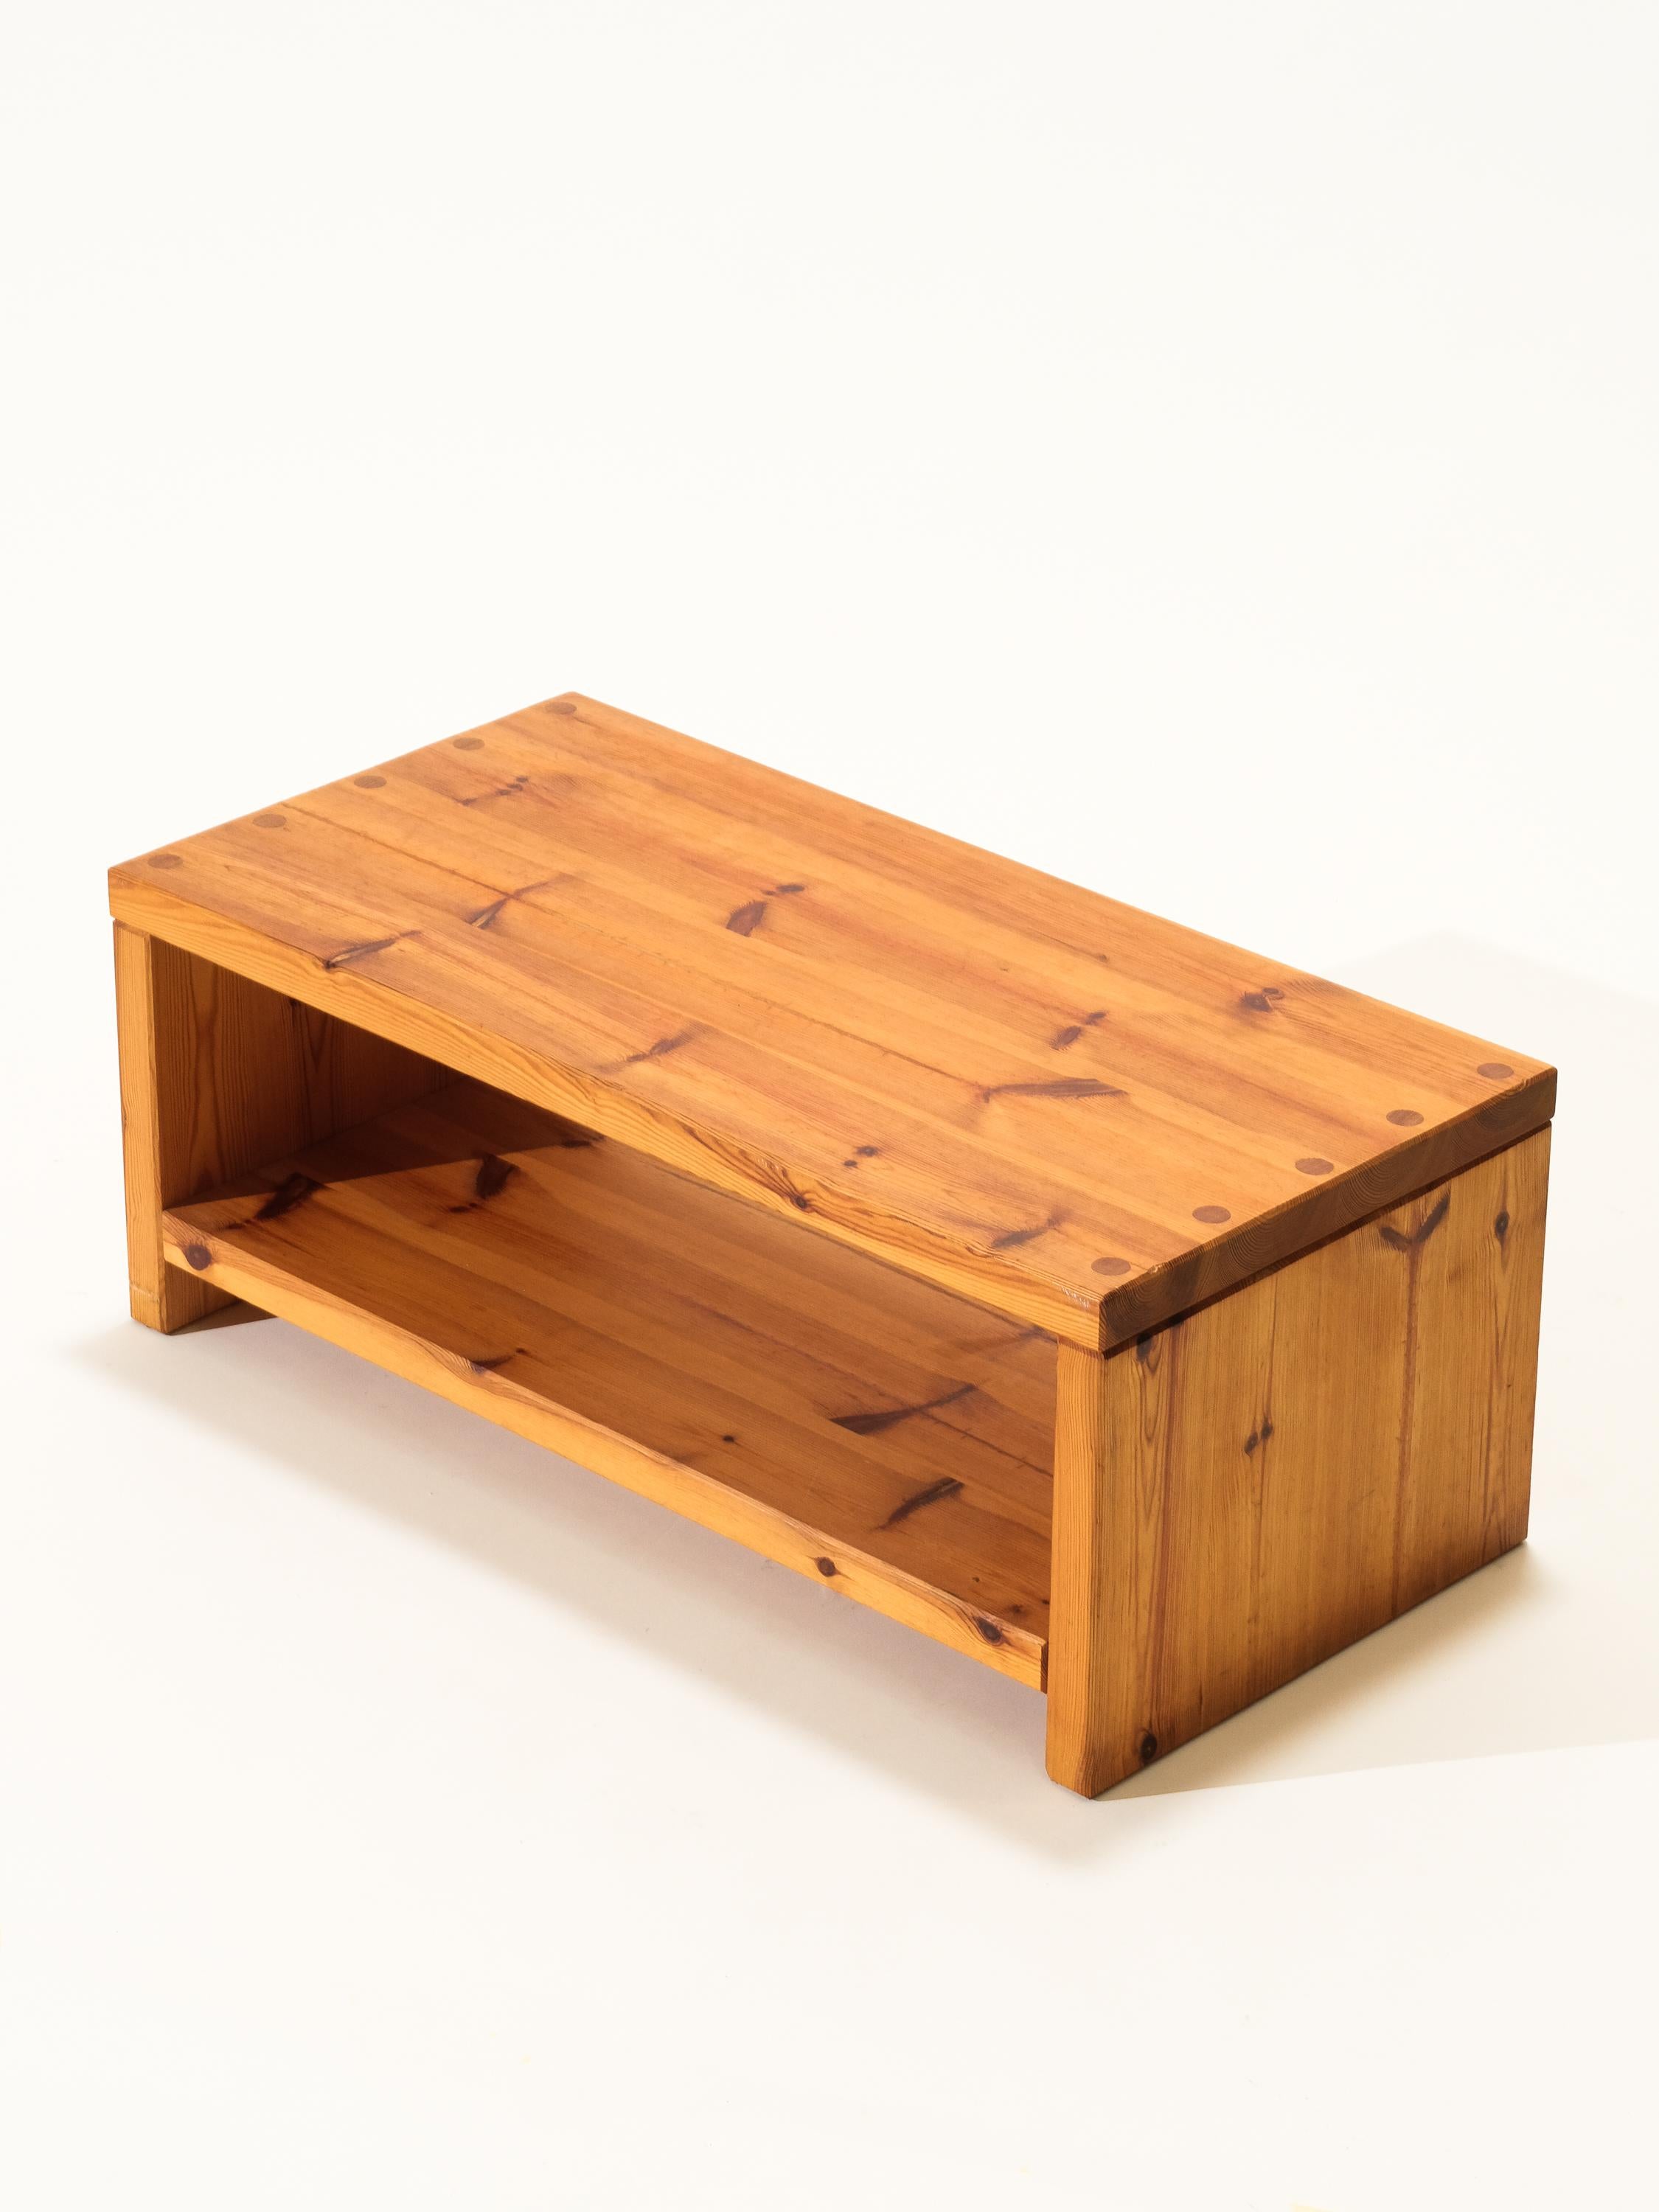 Solid Pine Side Table/Bench by Christer Larsson, Sweden, 1970s For Sale 2